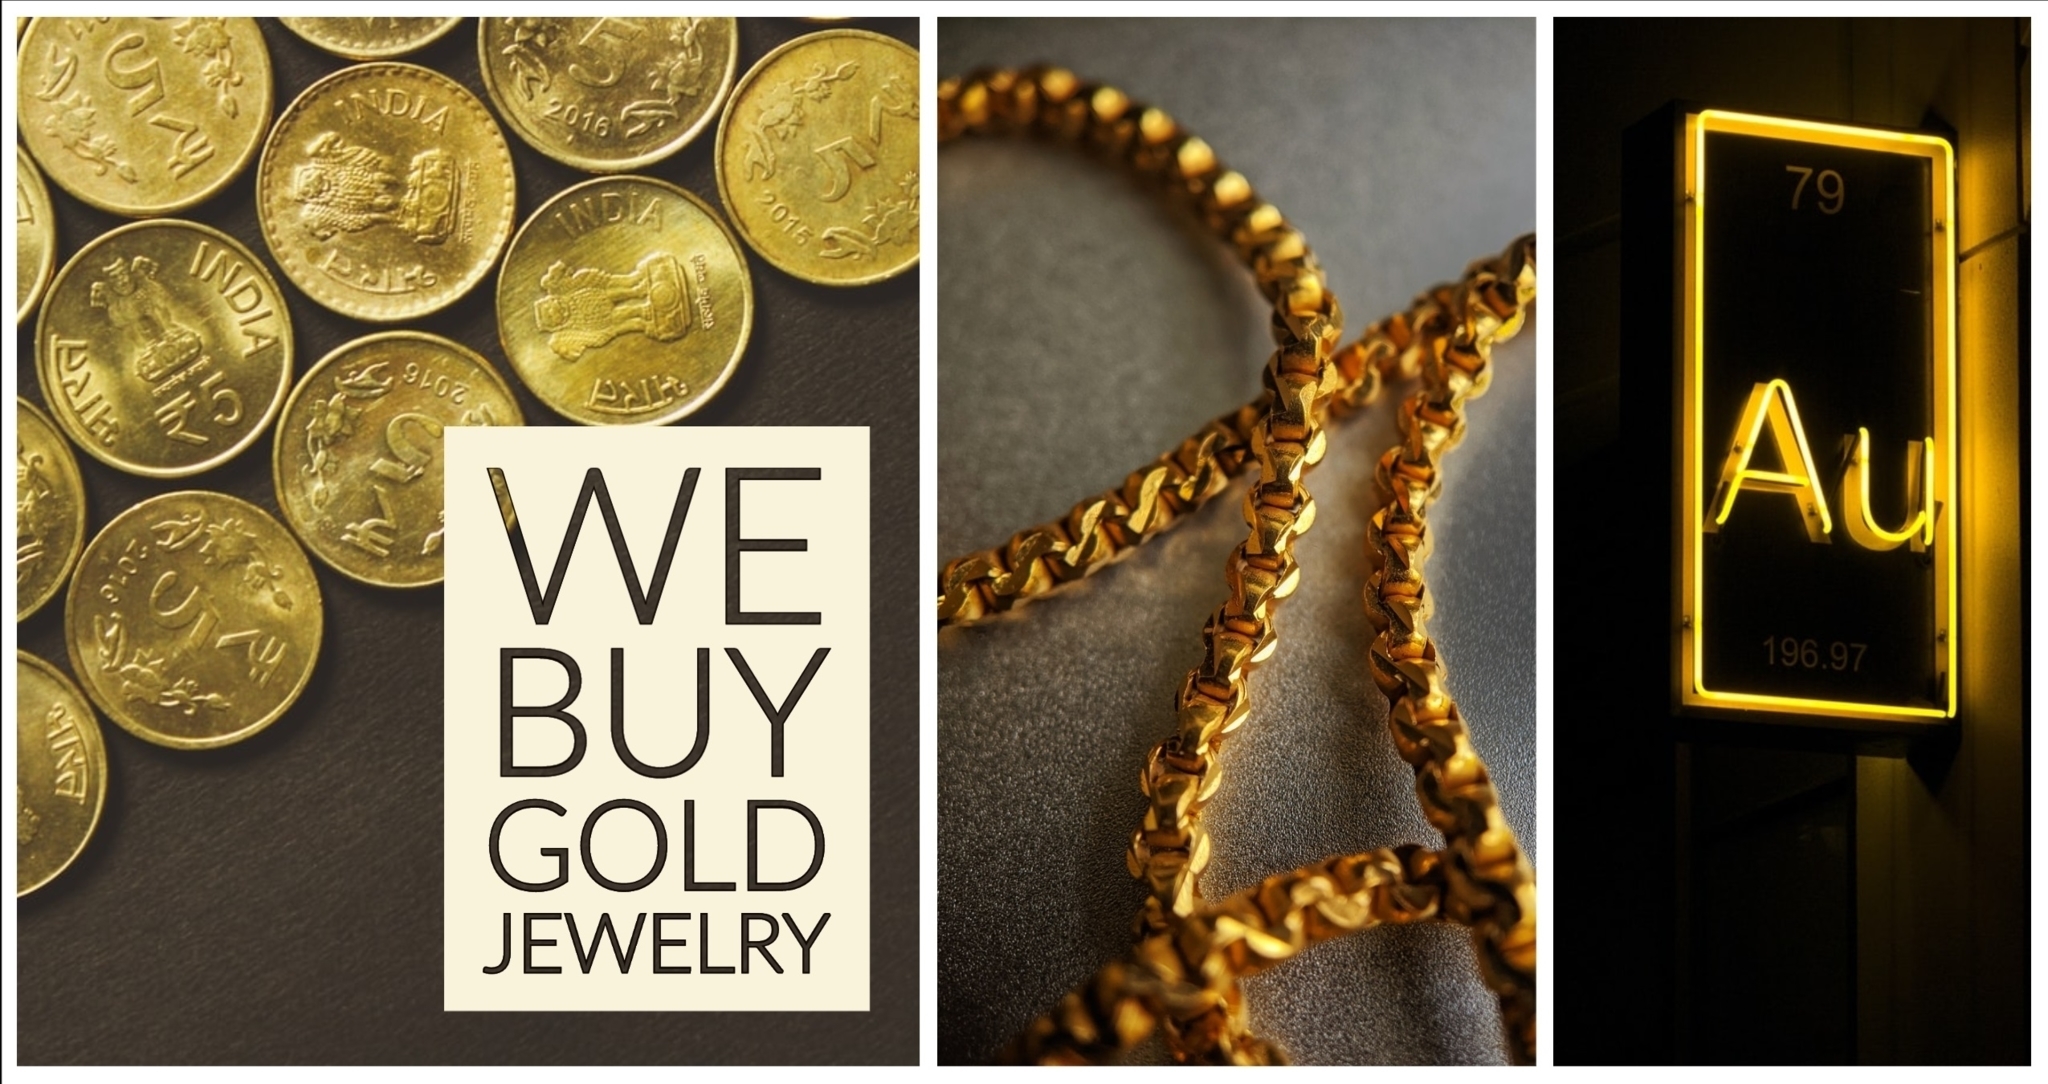 A&M Gold Buyers - Jewellery Buyers